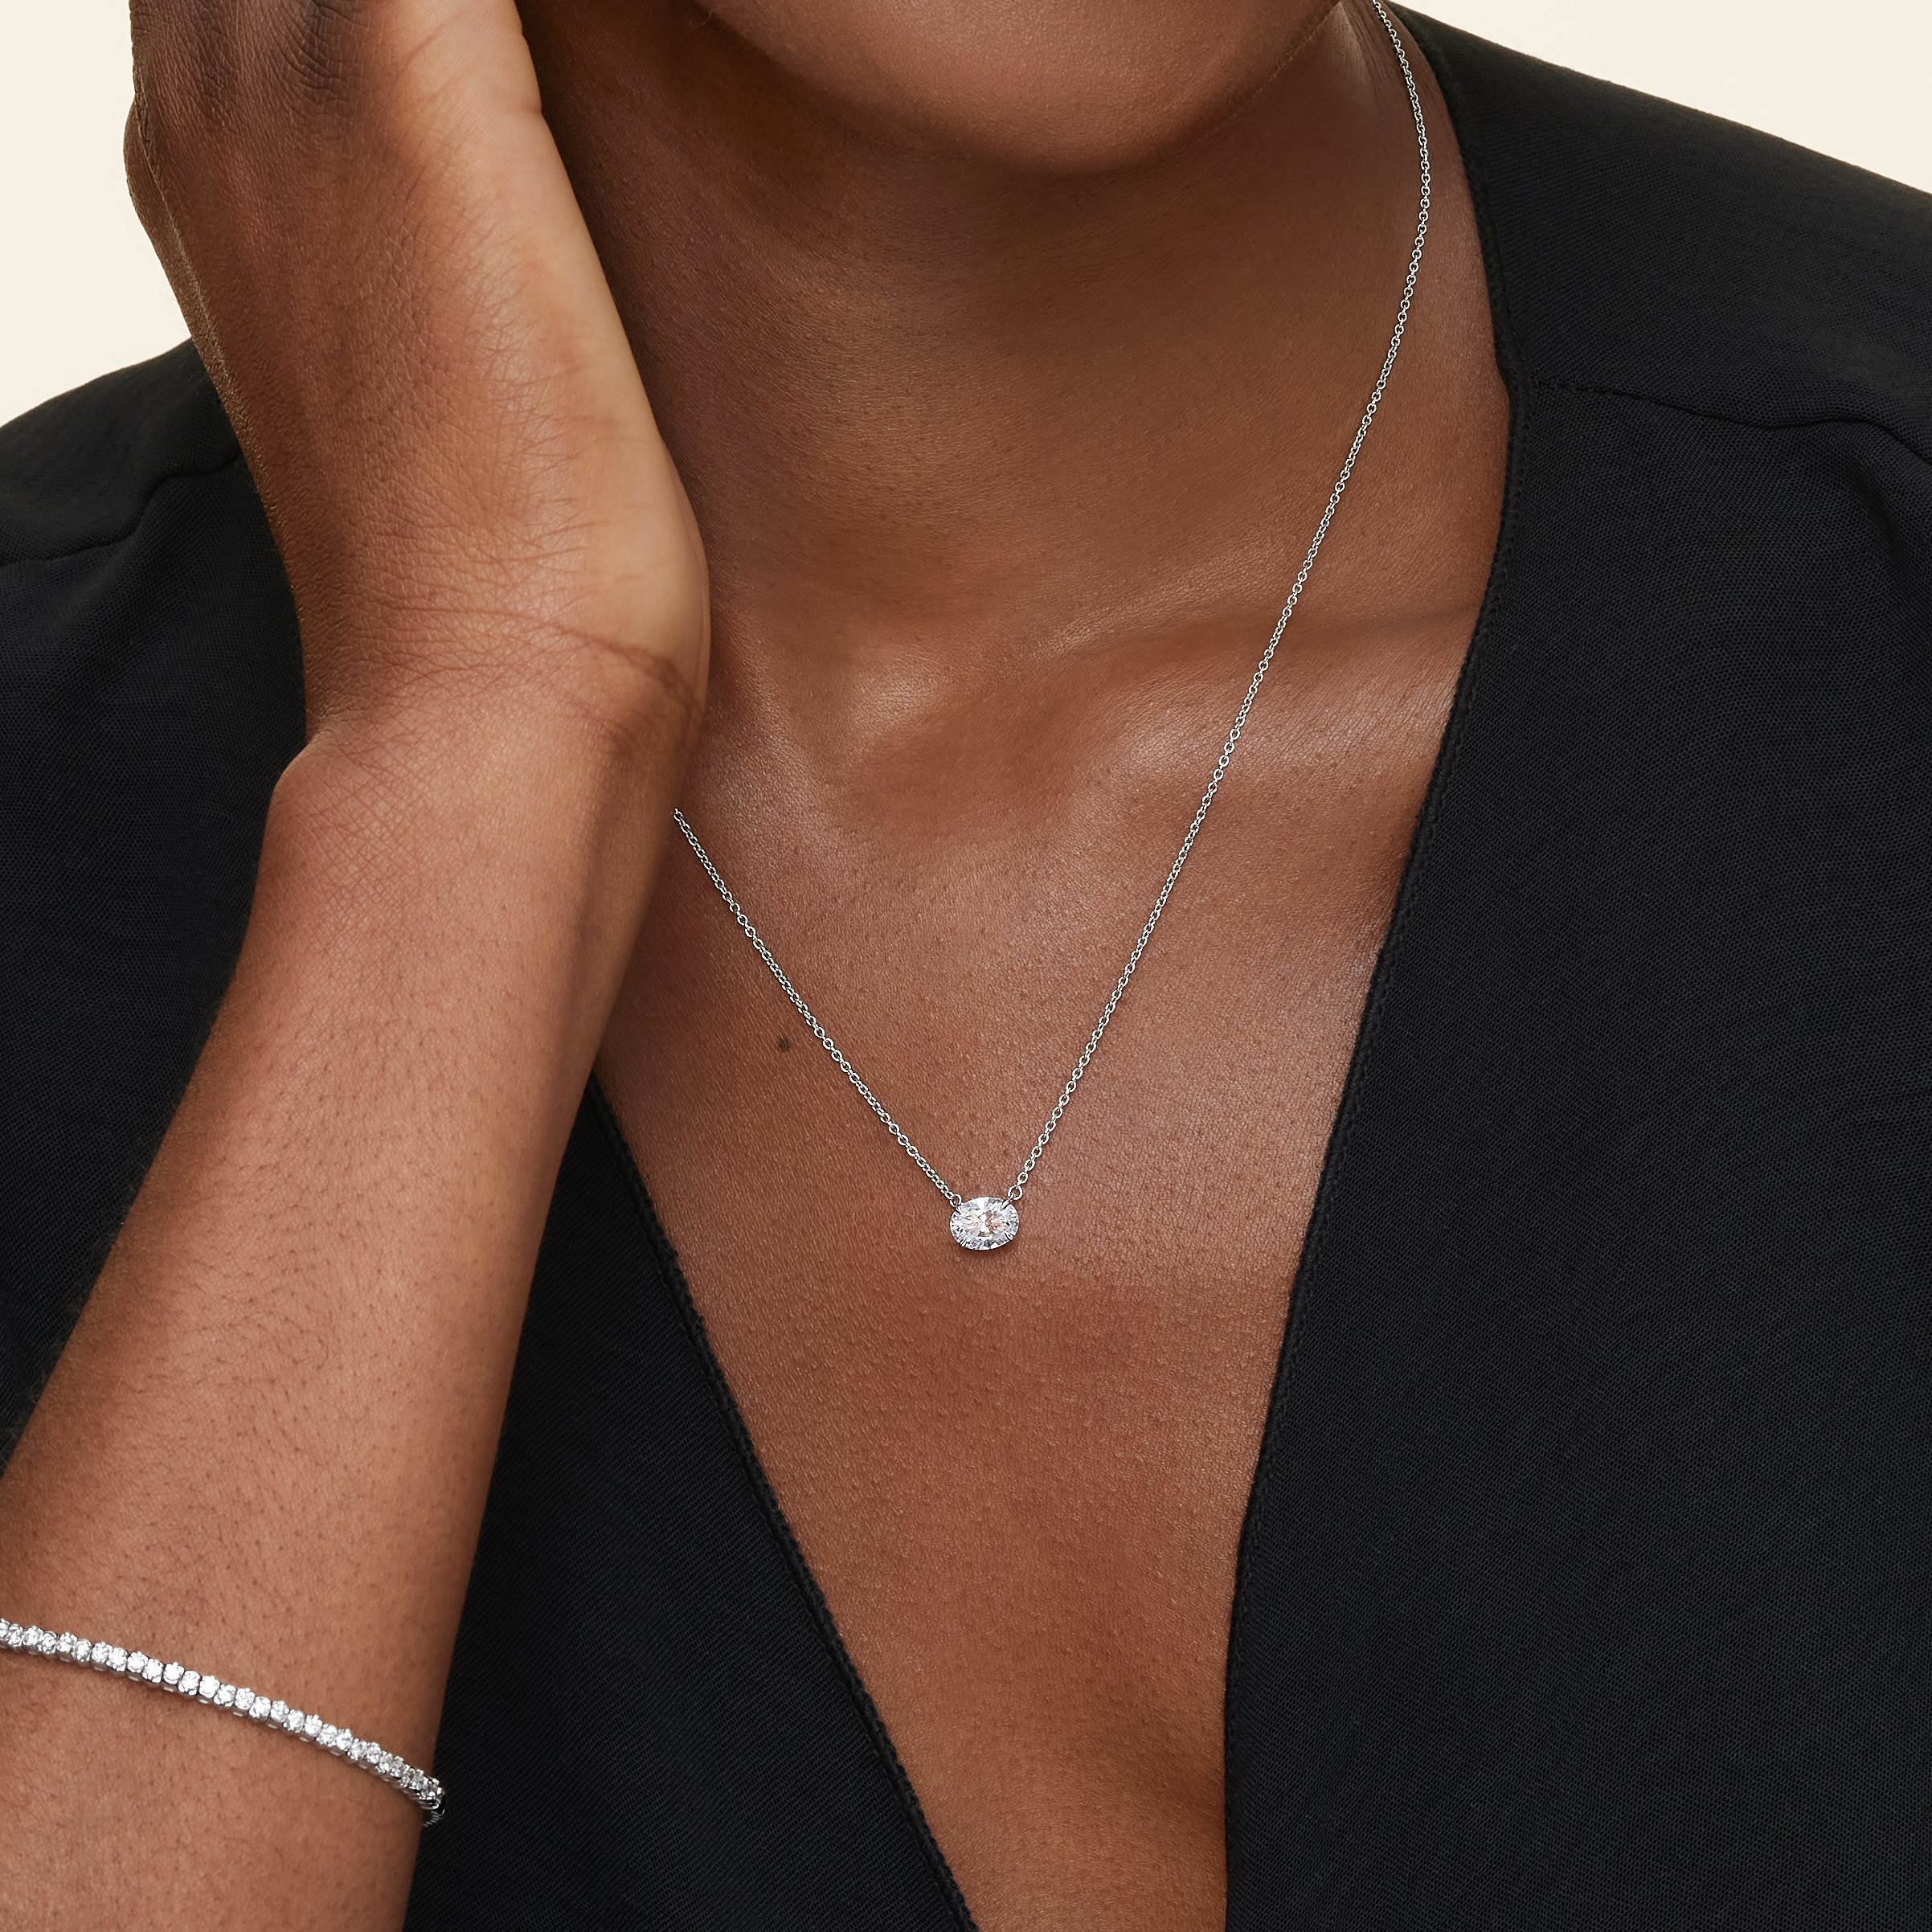 Brilliant Earth jewelry: Get free earrings and a necklace with select  purchases for Valentine's Day - Reviewed